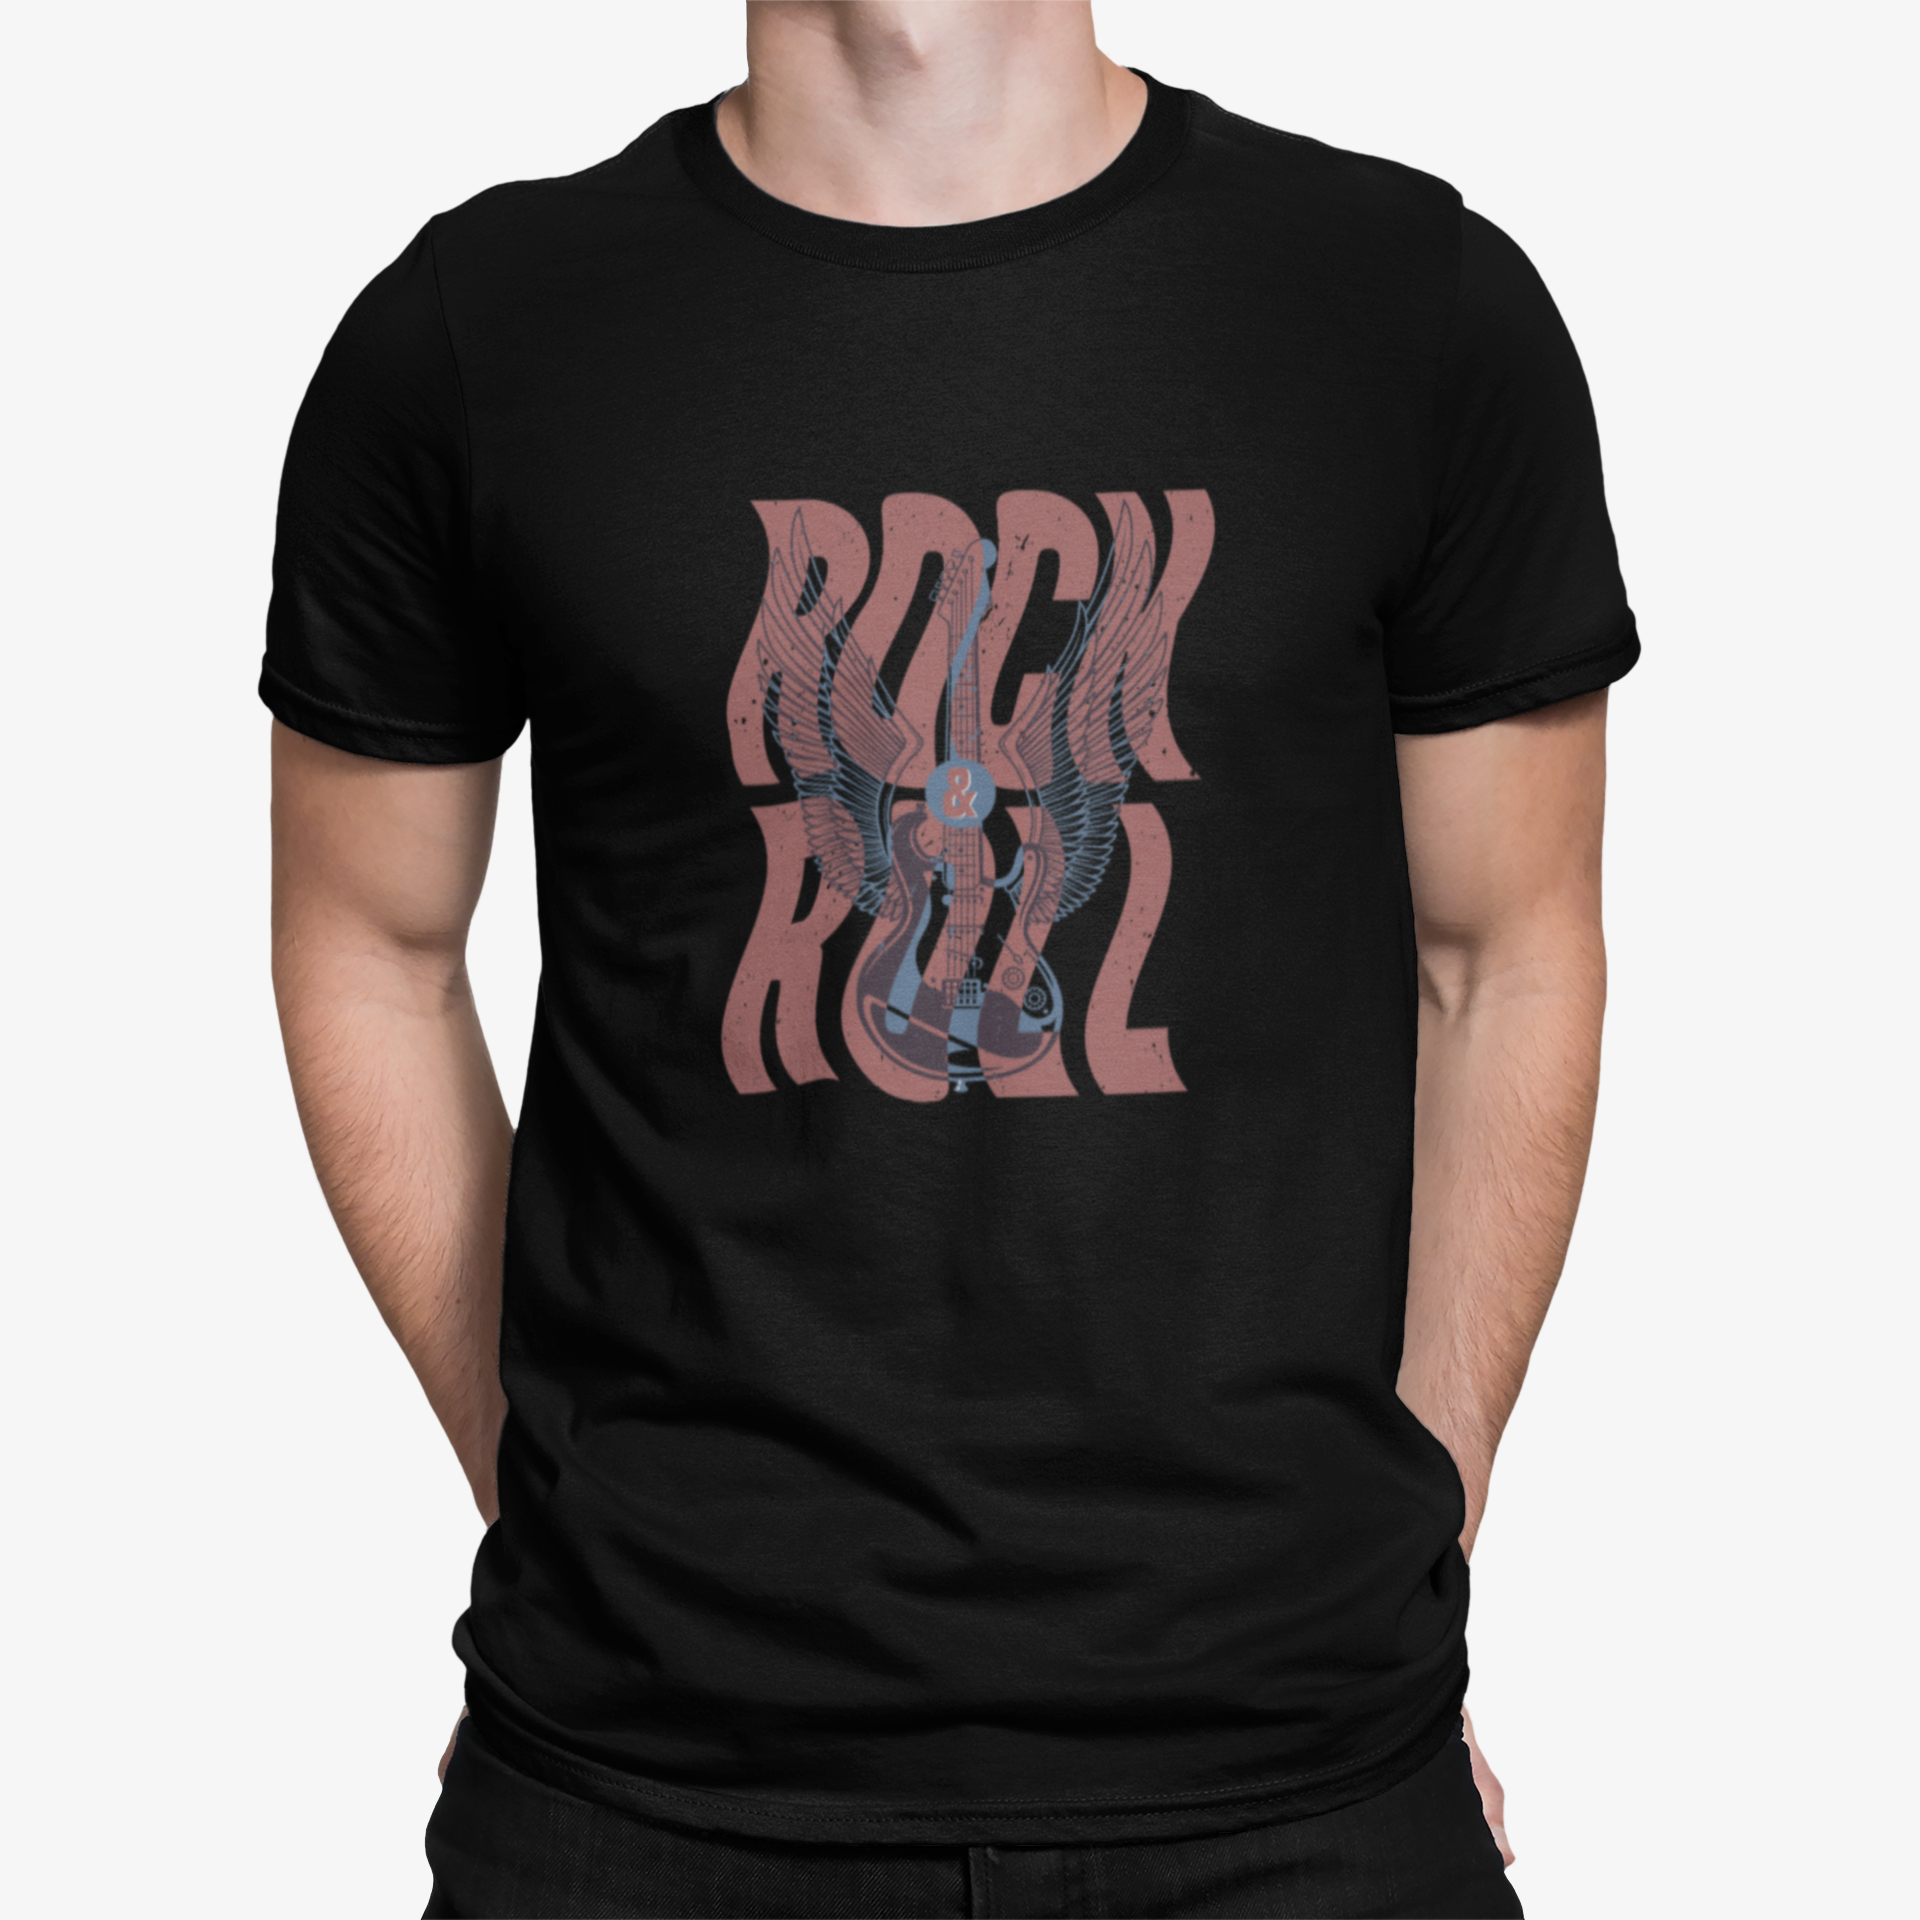 Camiseta Rock and Roll